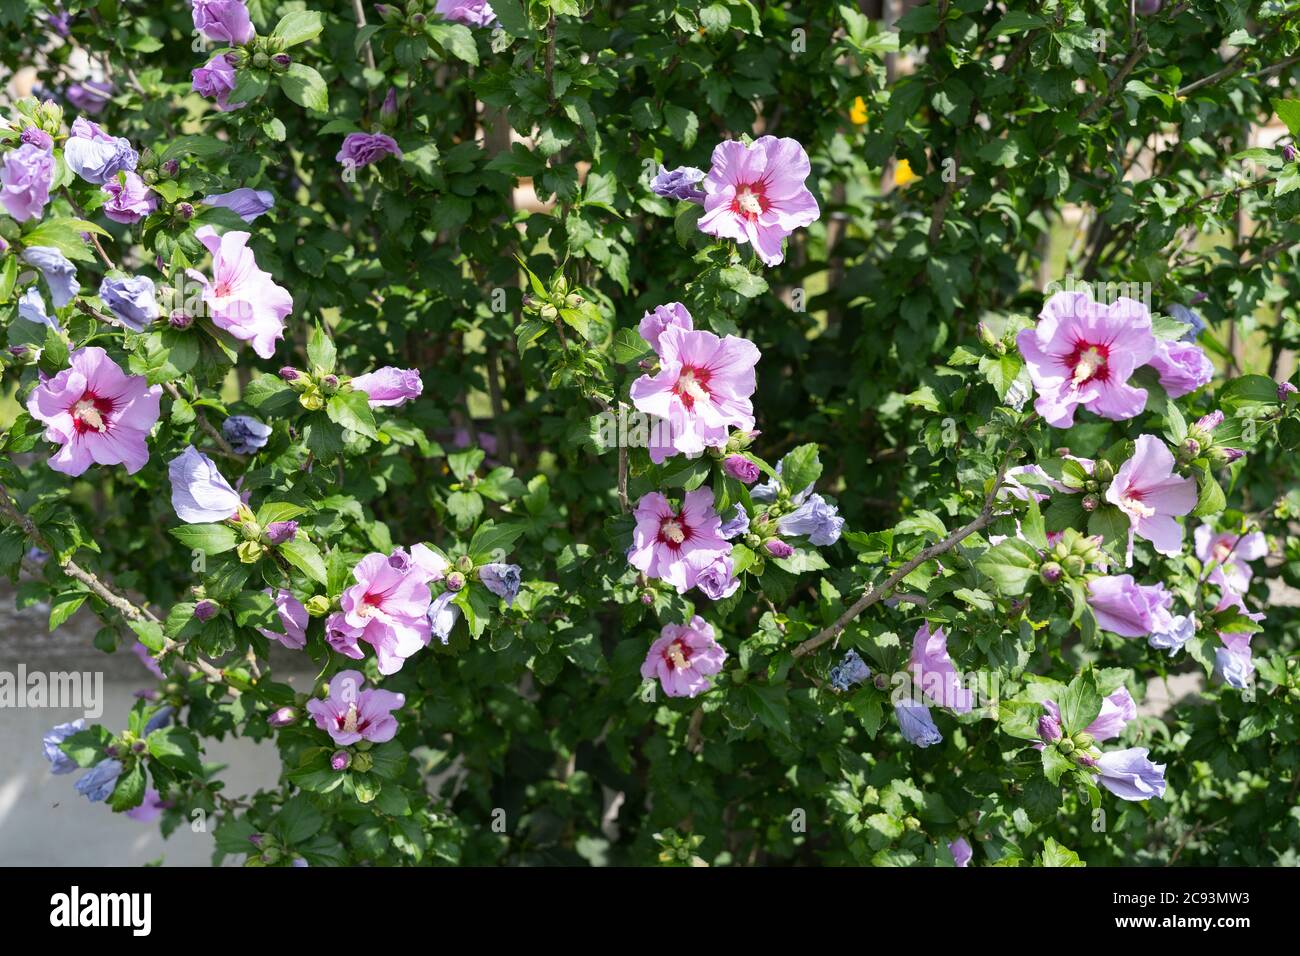 Hibiscus Syriacus L. (Rose of Shannon) bush or shrub in a garden in Austria with trumpet shaped pink flowers with dark red centres Stock Photo